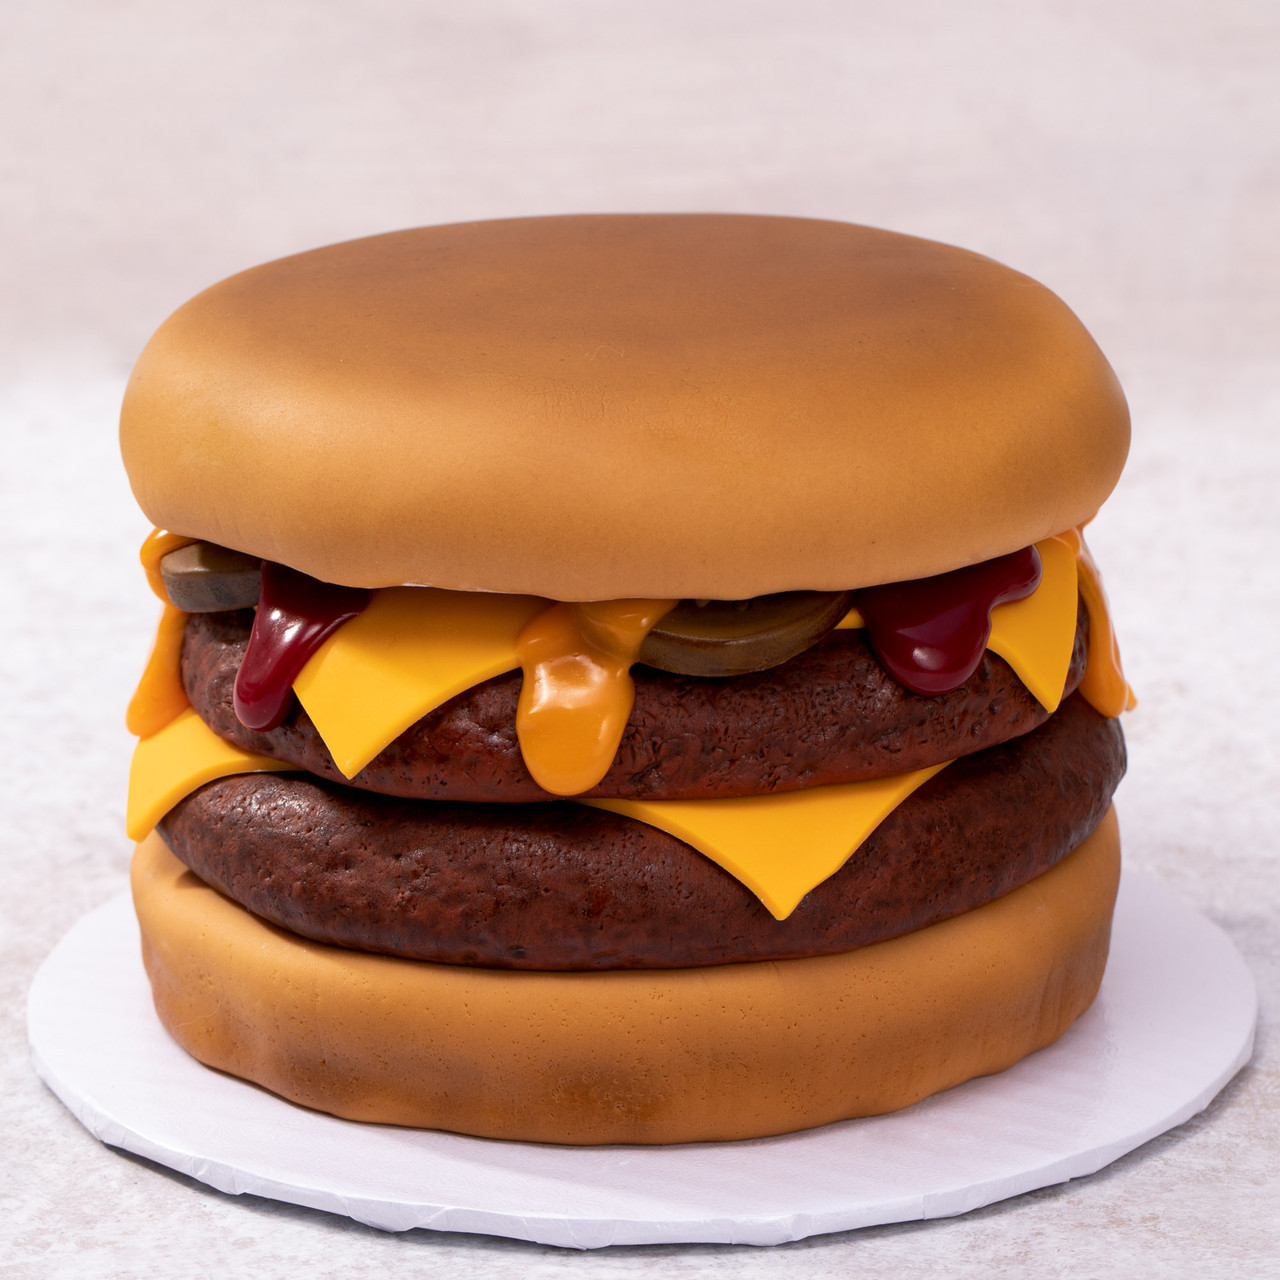 I find Walmart's burger cakes amusing. Still not as large as the Giant  Cheeseburger at Ed Walker's Drive In in Fort Smith. #burgercake #walmart